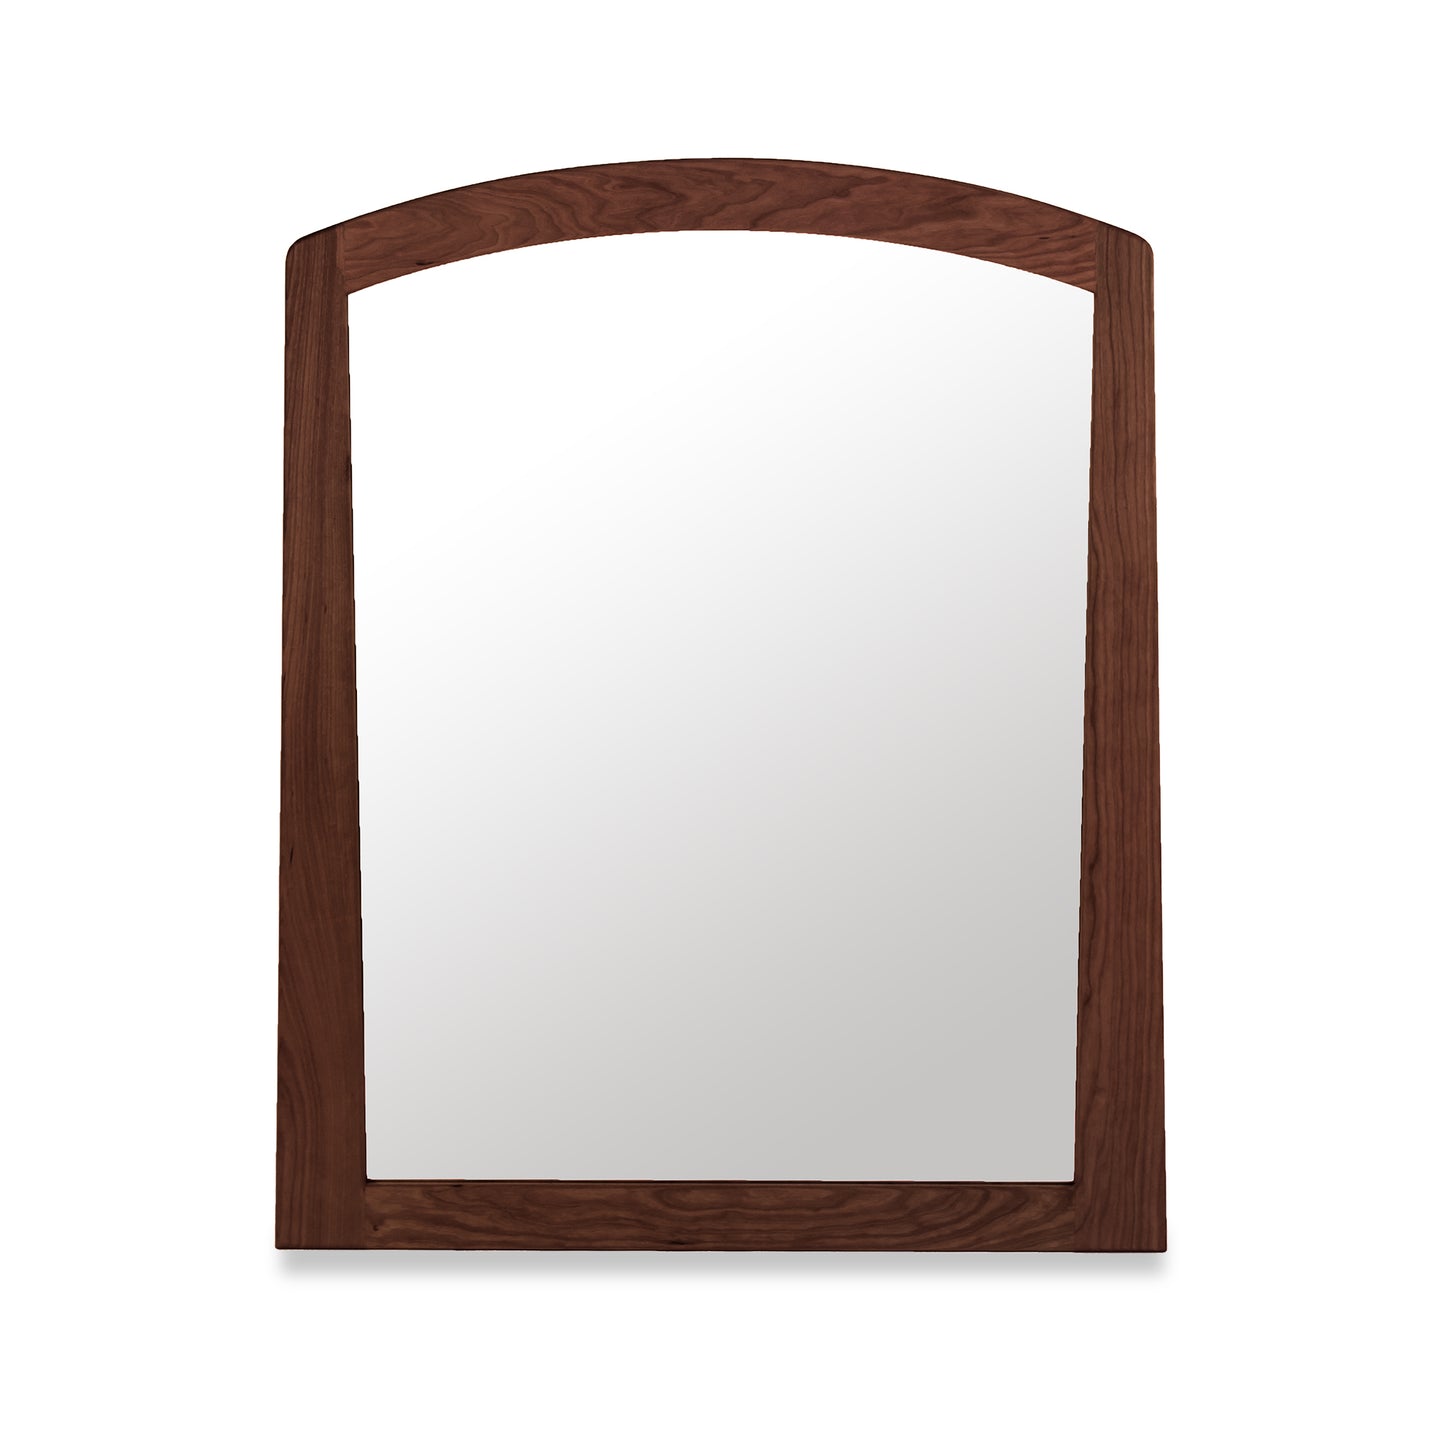 A Cherry Moon Vertical Mirror with a wooden frame on a white background. SEO keywords: Vermont furniture, hardwood frame.